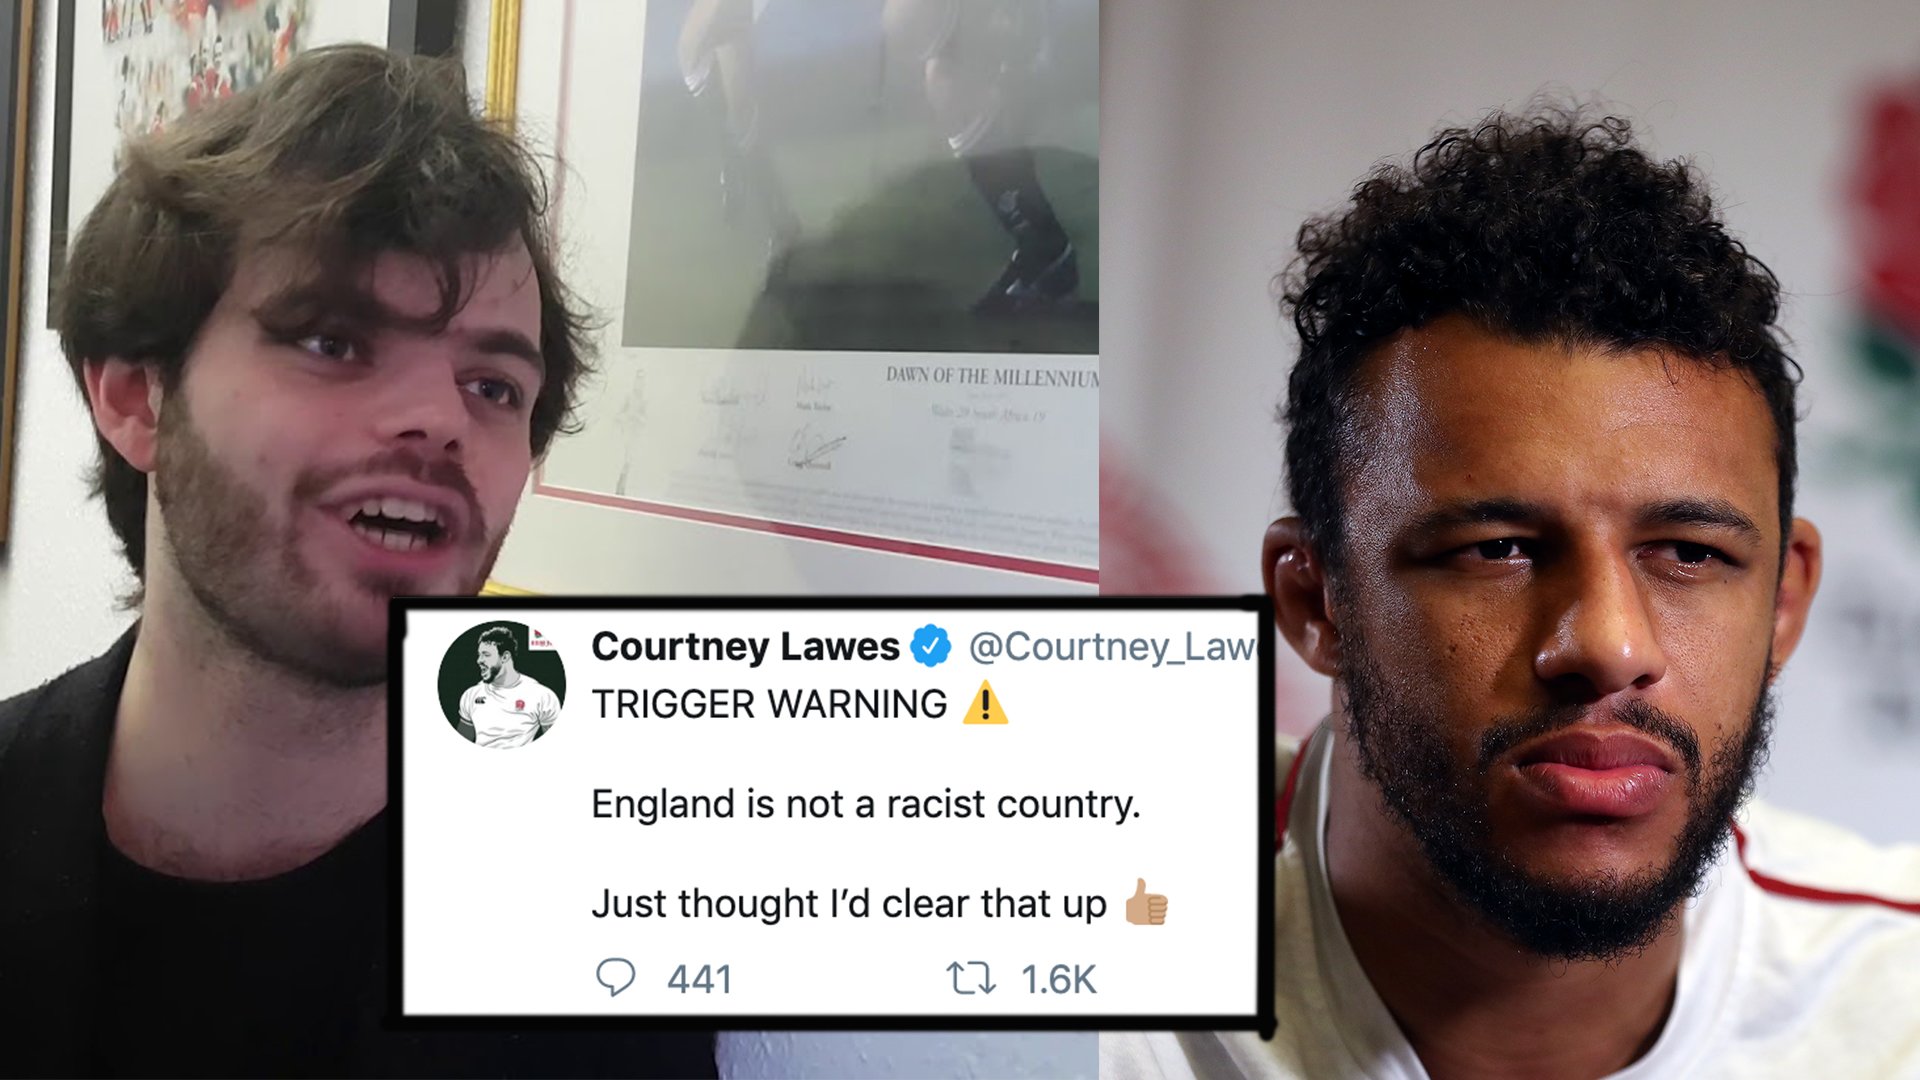 YouTuber Squidge Rugby and Courtney Lawes get into ugly online argument on Christmas Day